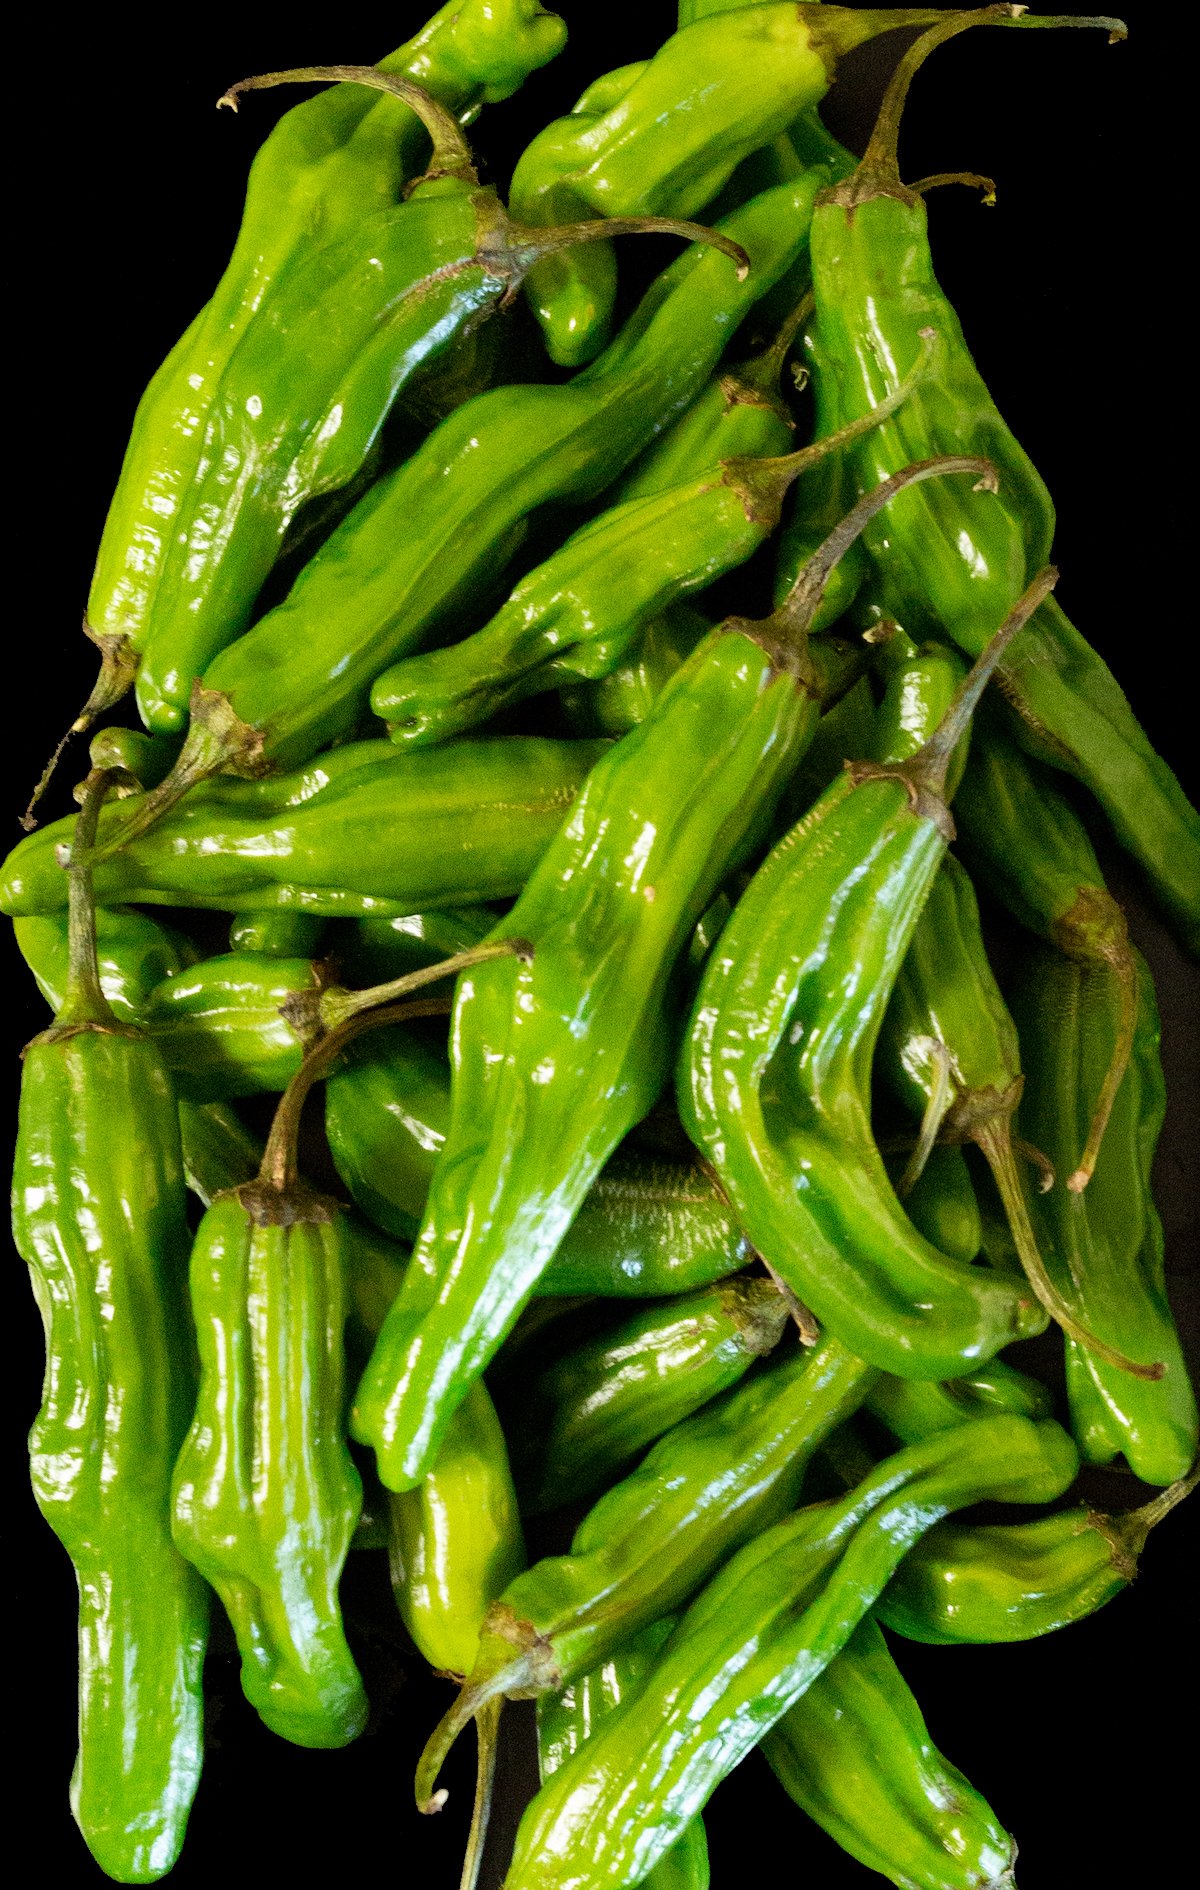 Fresh shishito peppers on a black background.